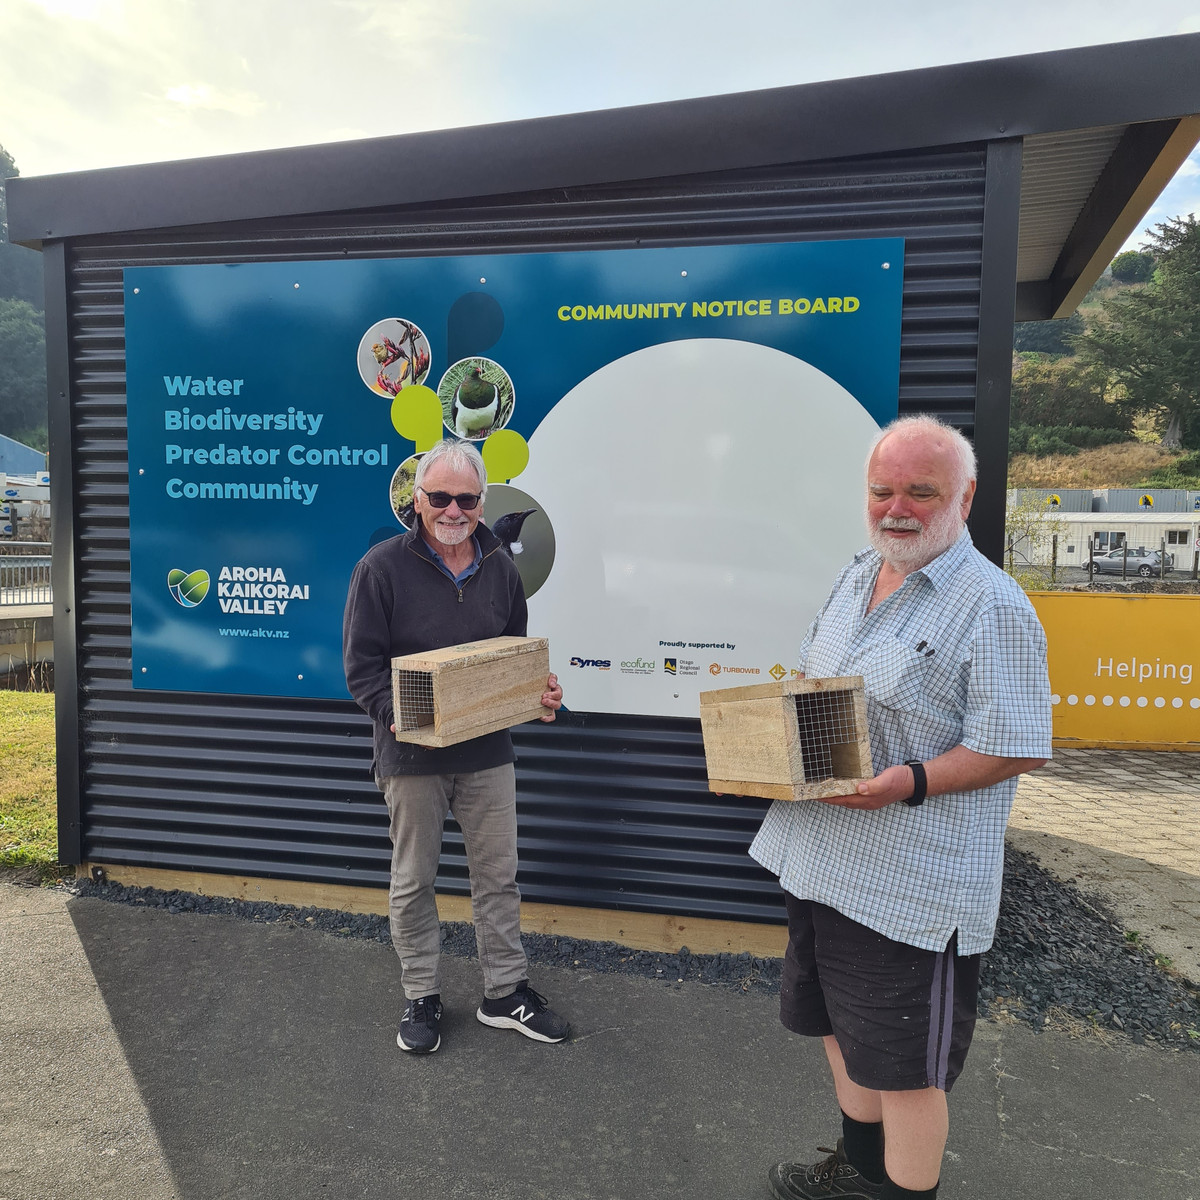 Chris and Gerard from the North Valley Shed deliver trap boxes